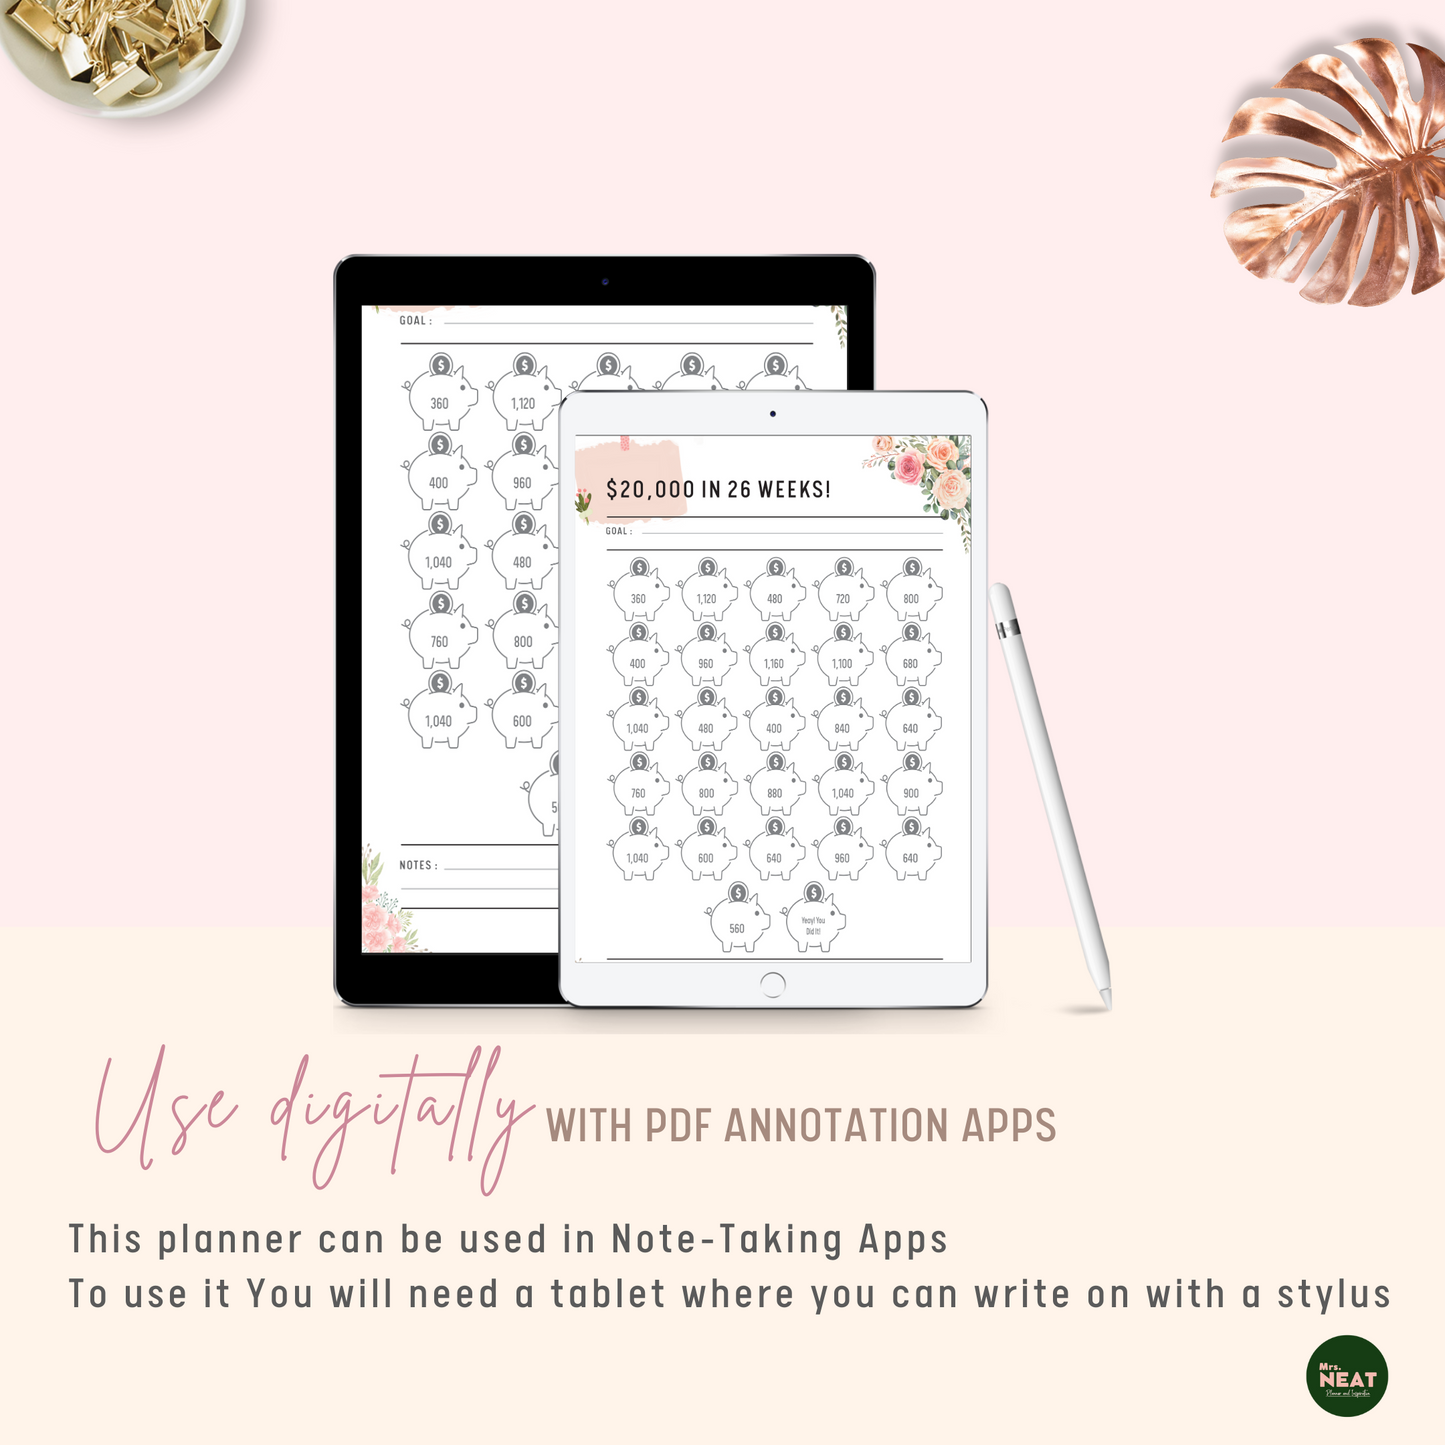 The Beautiful Floral $20,000 Savings Challenge in 6 Months planner can be use digitally with pdf annotation apps